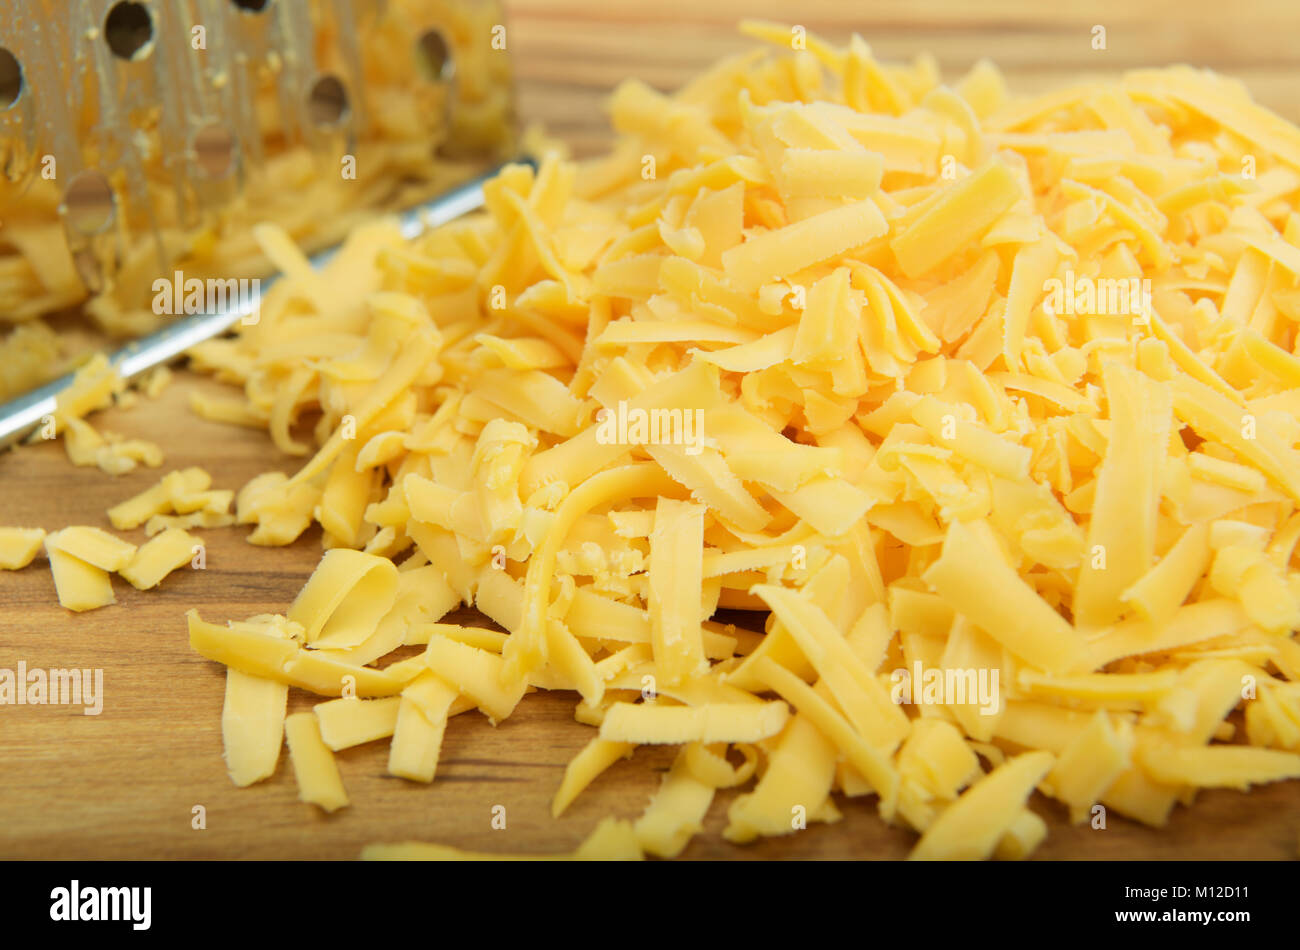 https://c8.alamy.com/comp/M12D11/close-up-detail-yellow-grated-cheese-hand-grater-on-wooden-board-food-M12D11.jpg